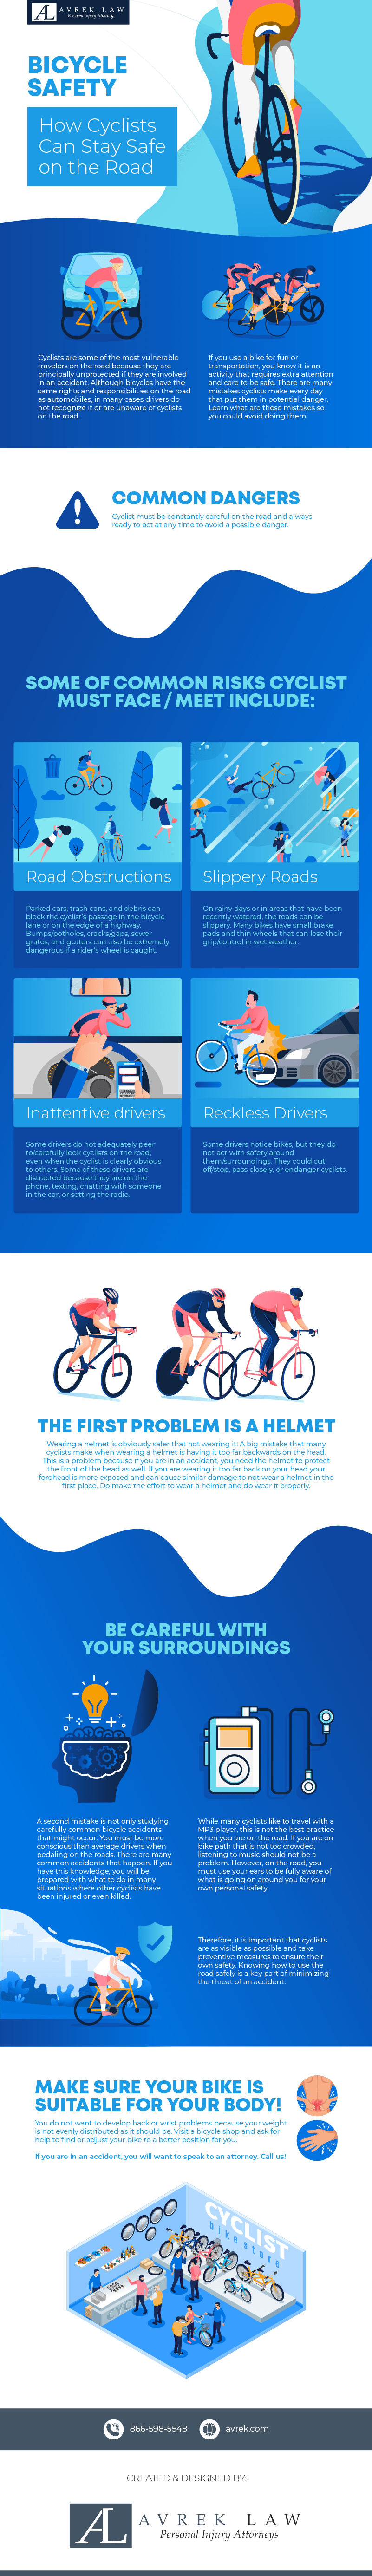 Bicycle Safety Infographic